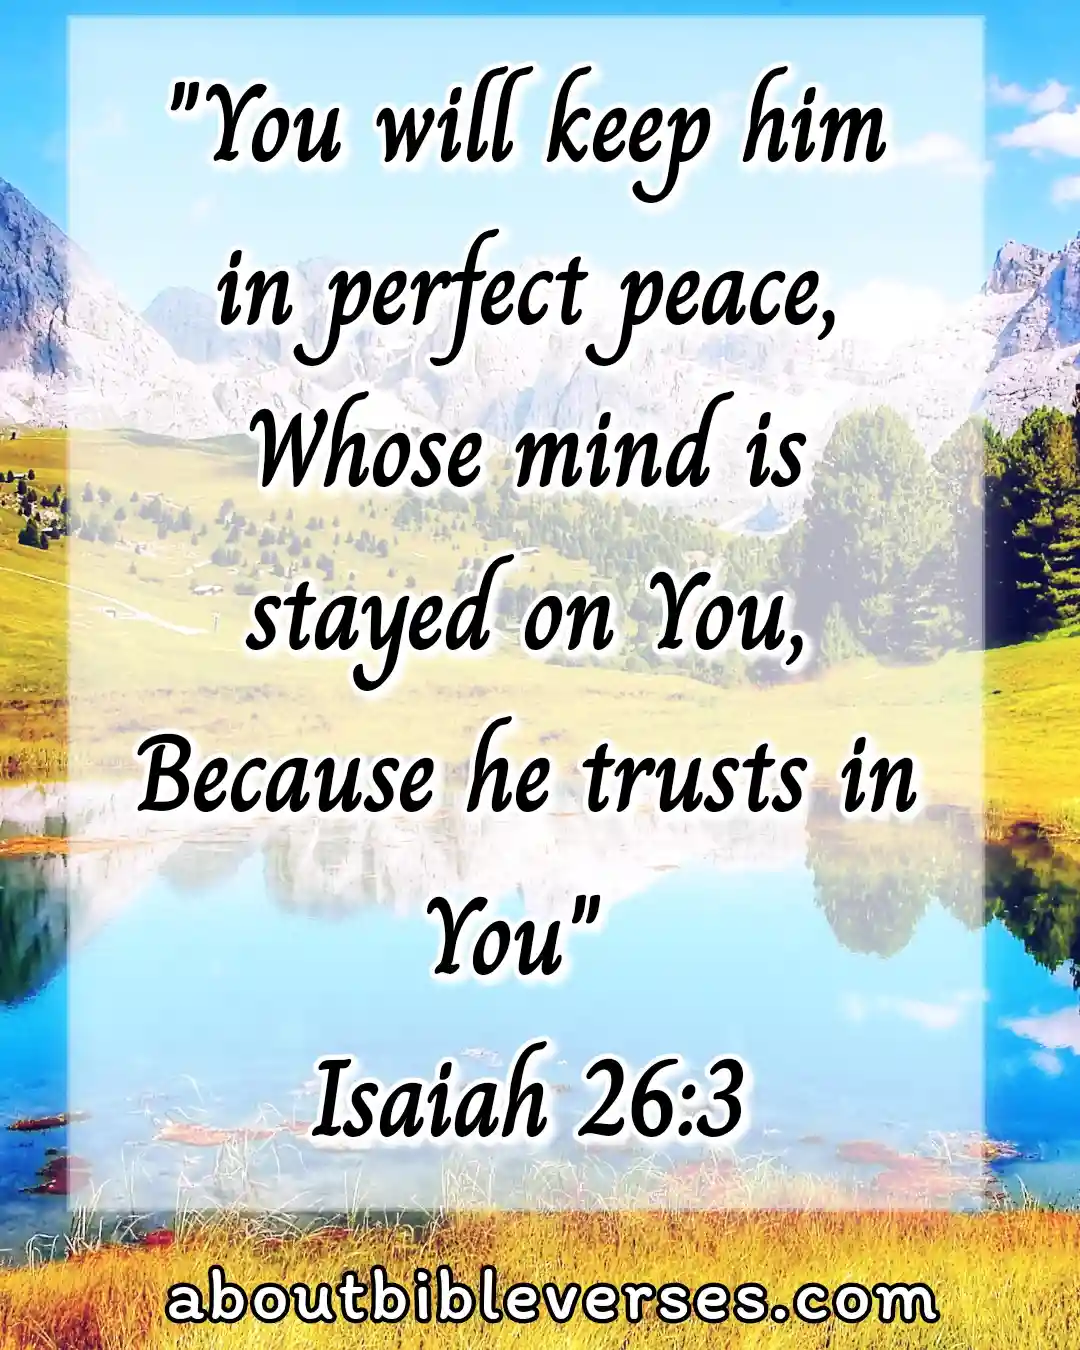 Bible Verses About Staying Positive In Hard Times (Isaiah 26:3)